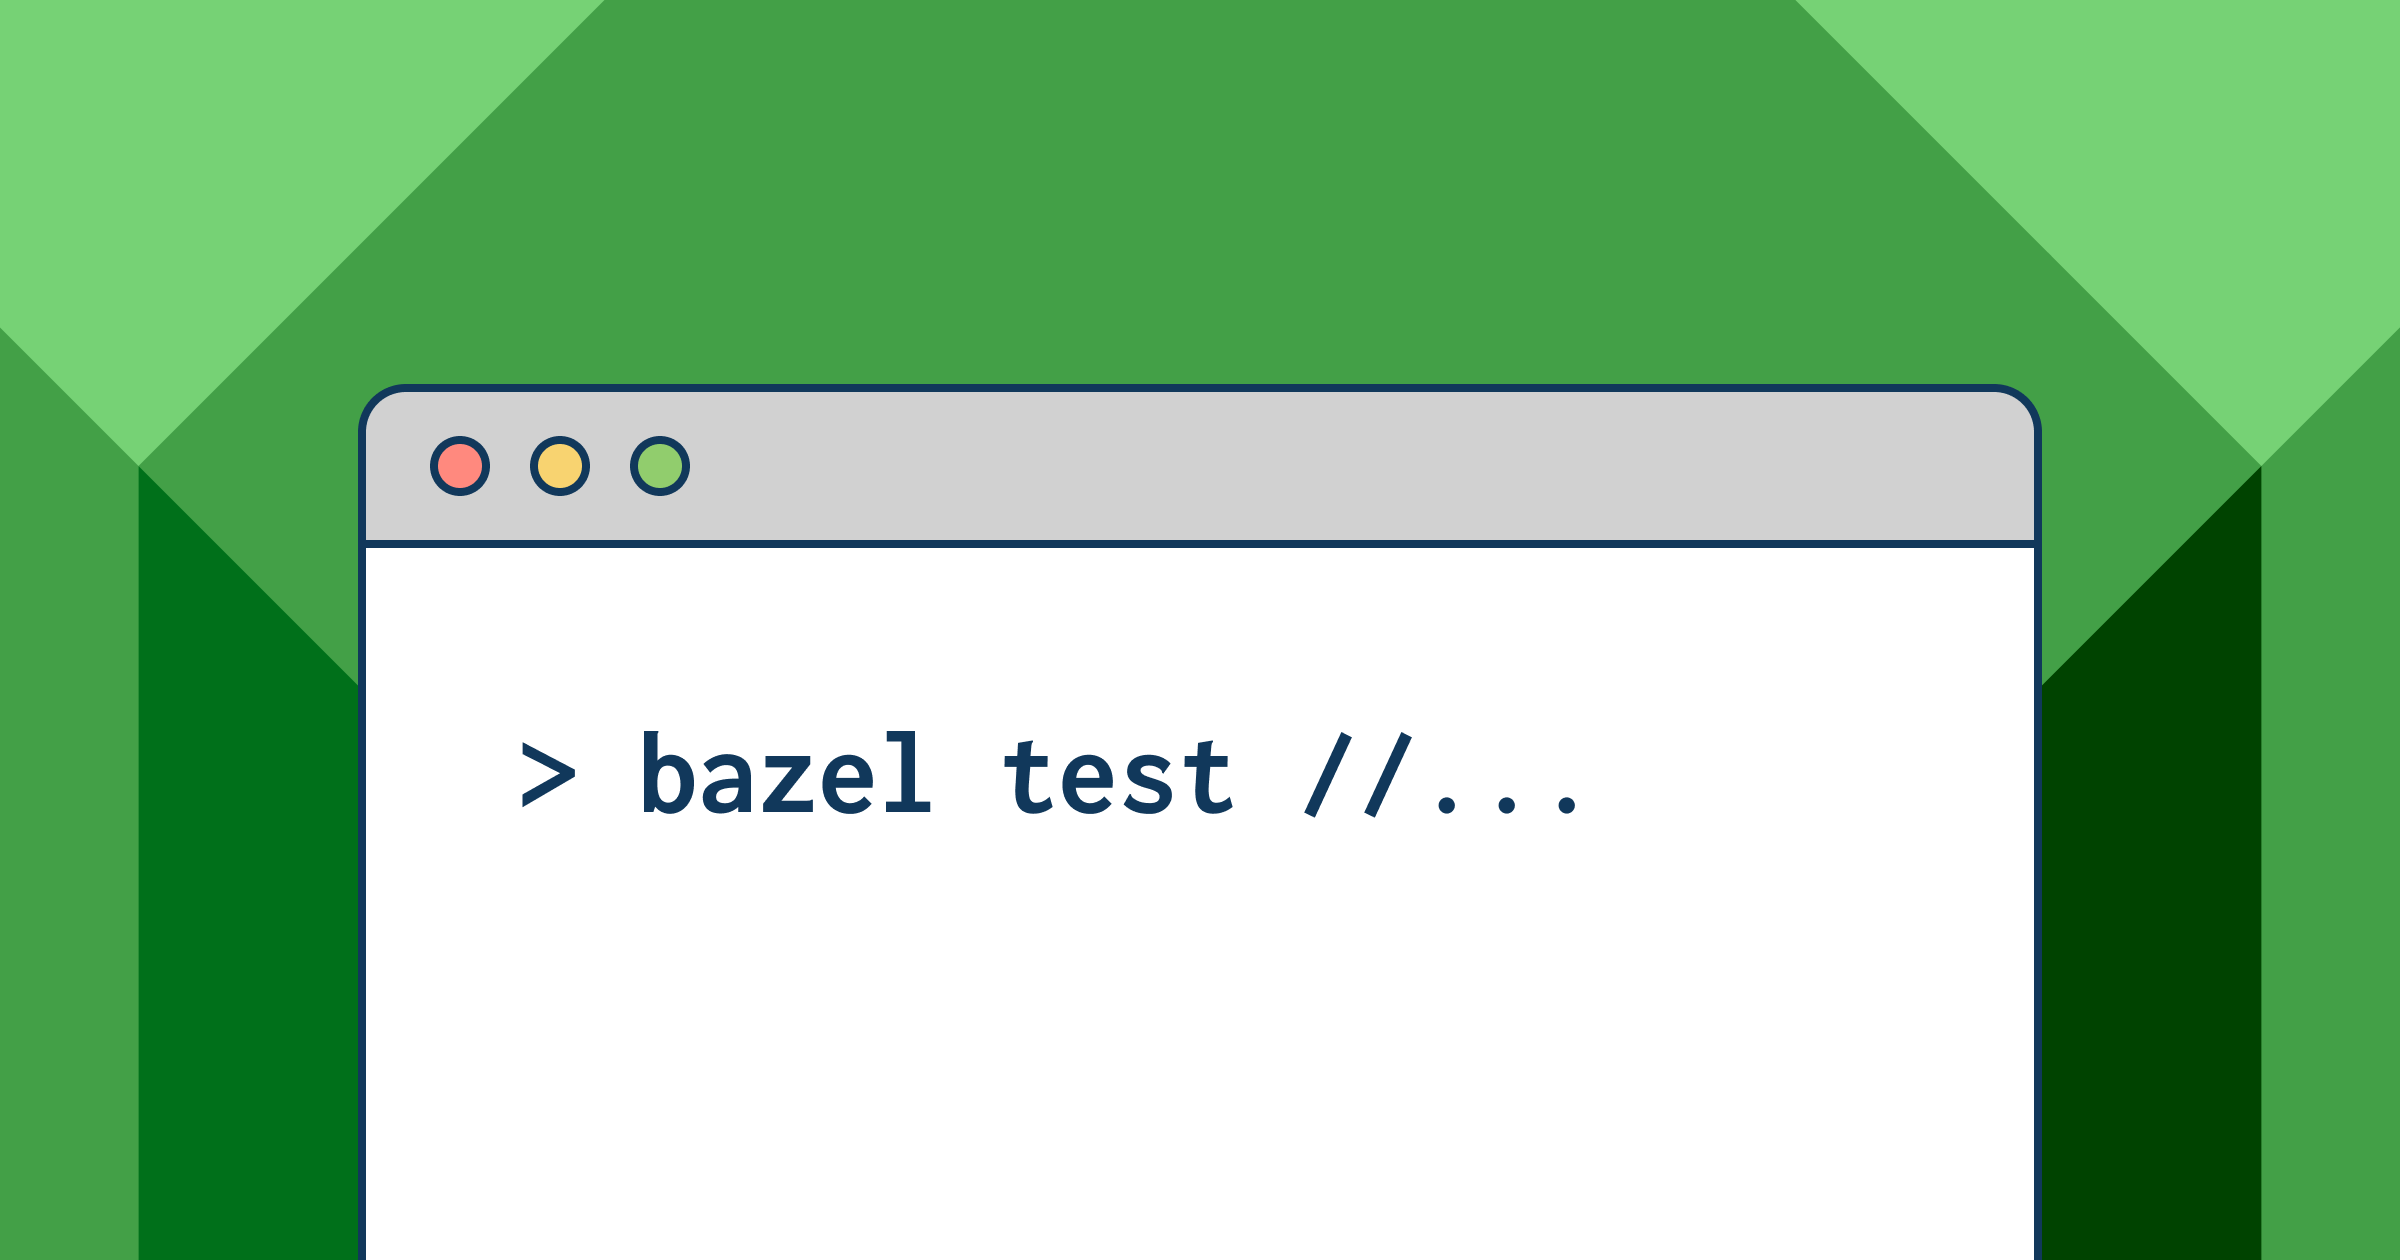 A window on a computer screen with a line of code that says "bazel test"